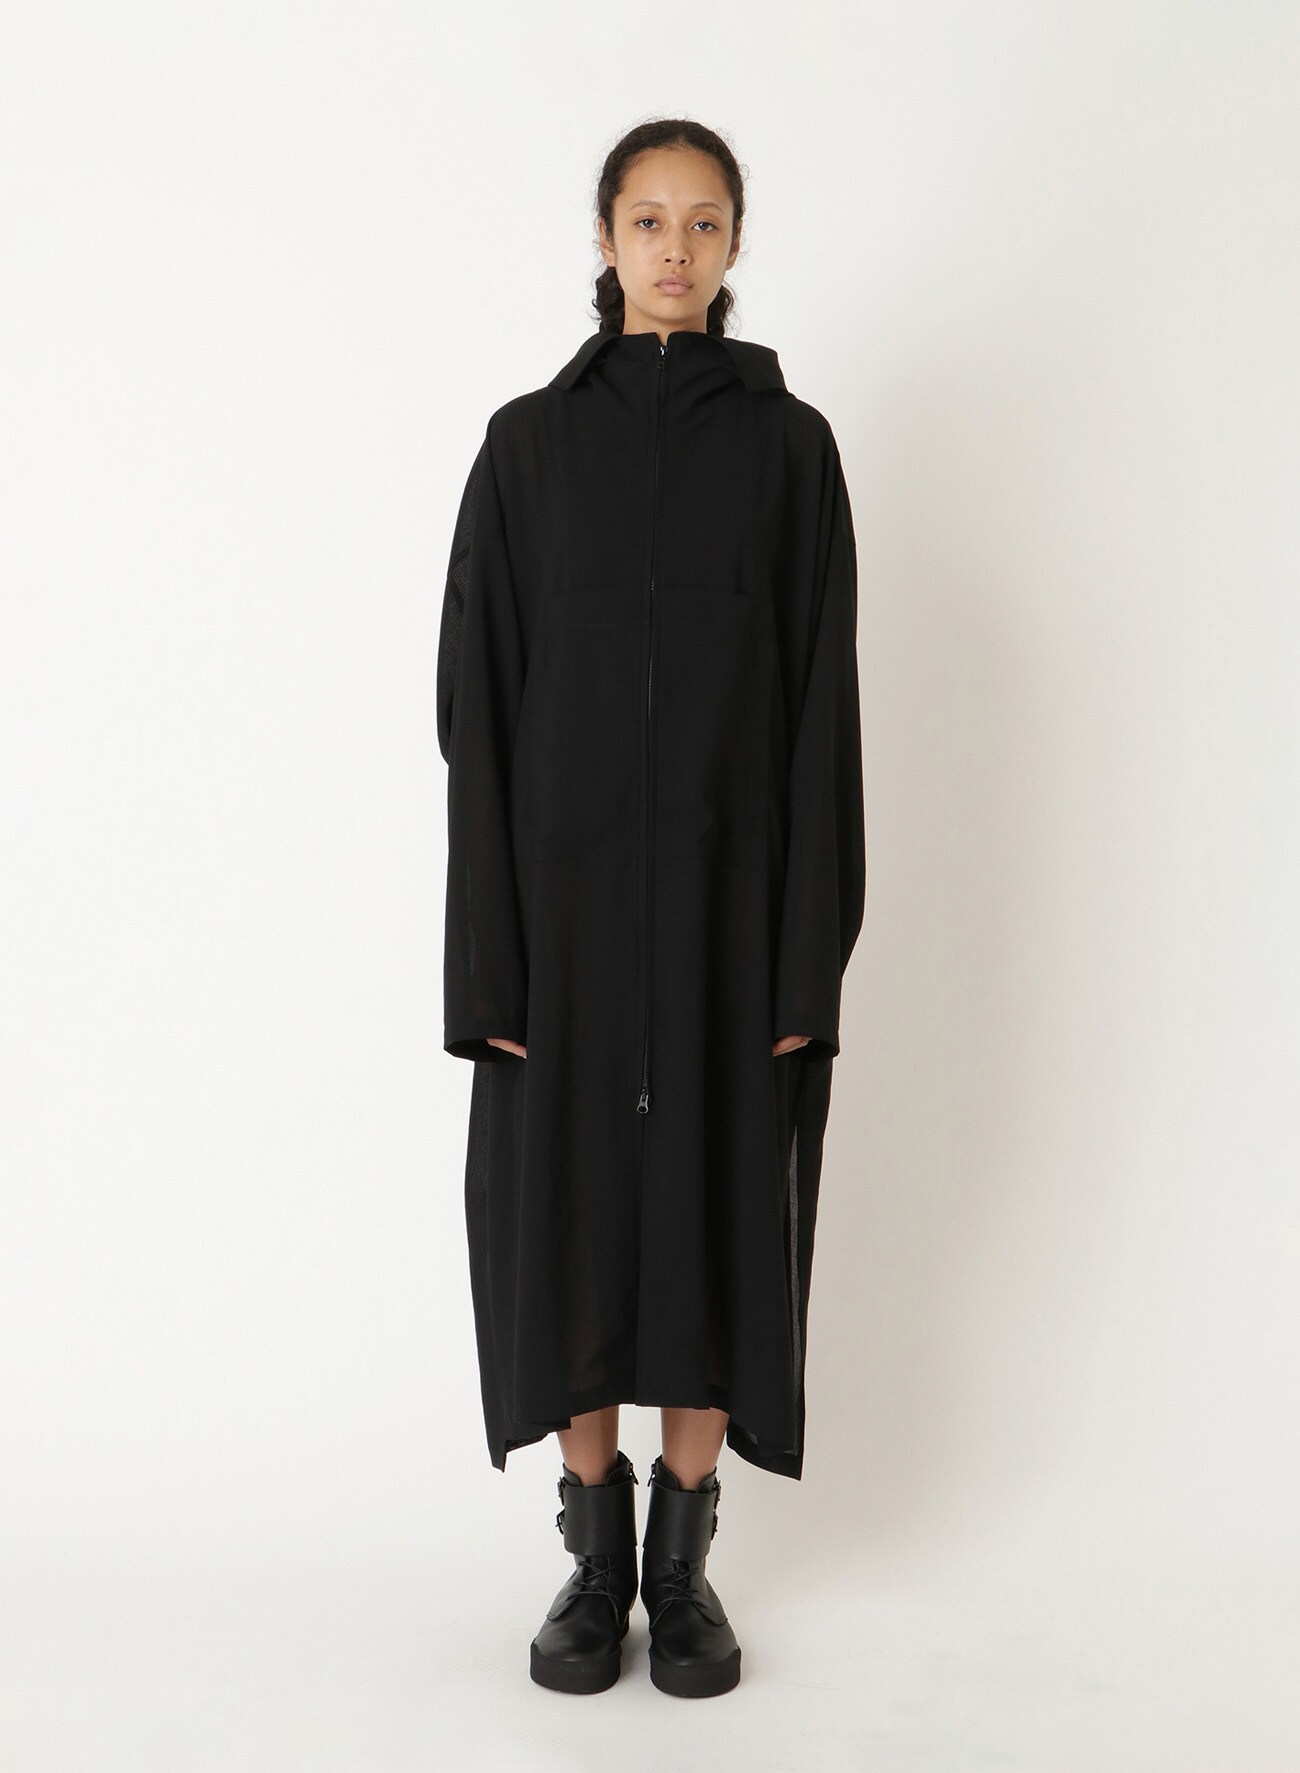 Pe/ STRONG TWISTED CLOTH ANORAK COAT